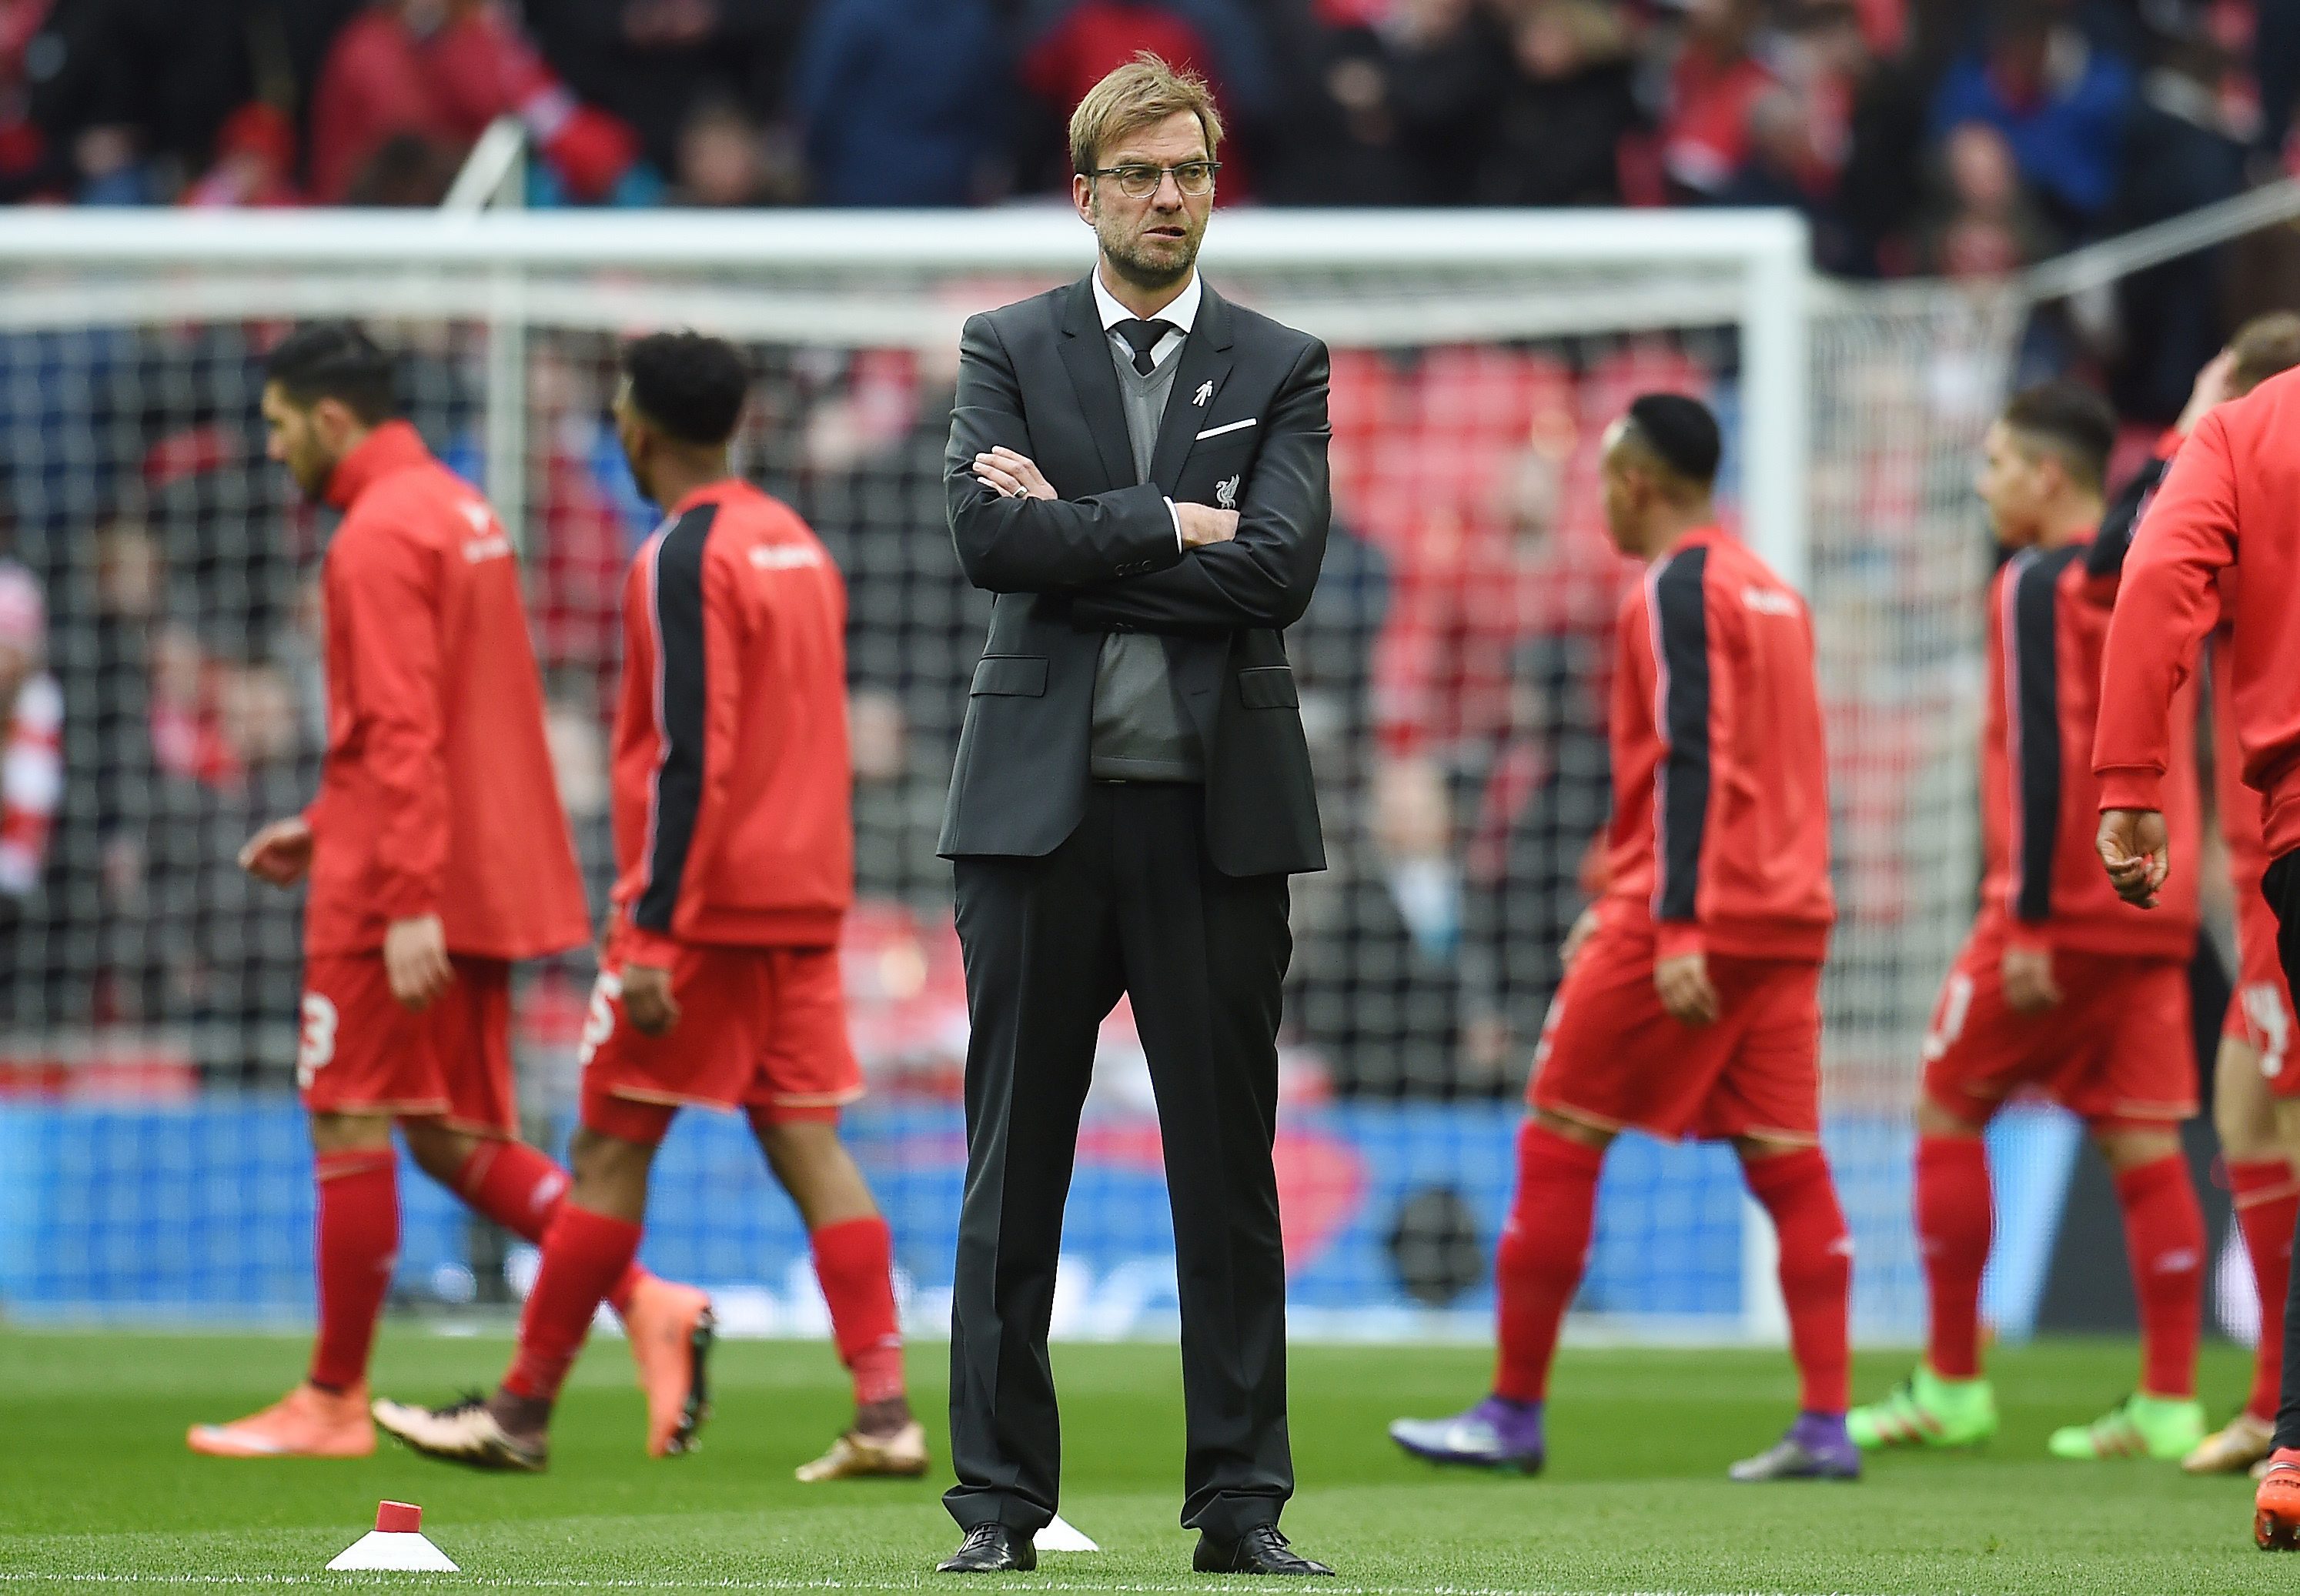 epa05185326 Liverpool manager Juergen Klopp looks over the Man City team as they warm up ahead of the English Capital One Cup final at Wembley Stadium in London, Britain, 28 February 2016.  EPA/ANDY RAIN EDITORIAL USE ONLY. No use with unauthorized audio, video, data, fixture lists, club/league logos or 'live' service. Online in-match use limited to 75 images, no video emulation. No use in betting, games or single club/league/player publications